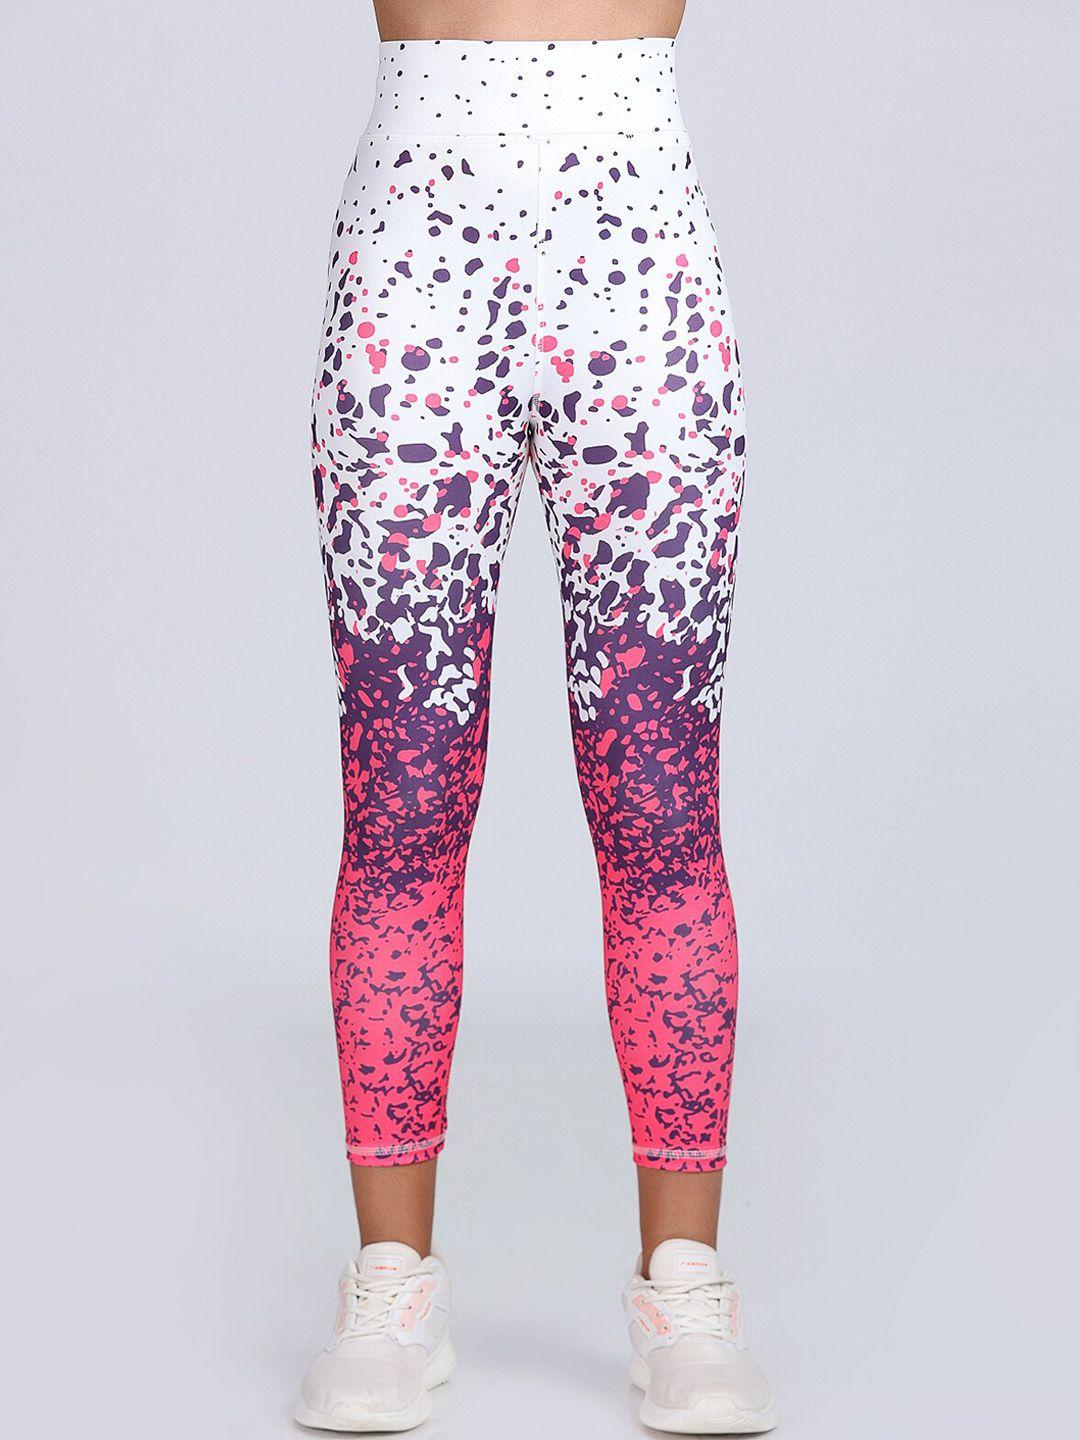 apraa-&-parma-women-abstract-printed-dry-fit-cropped-high-rise-running-tights